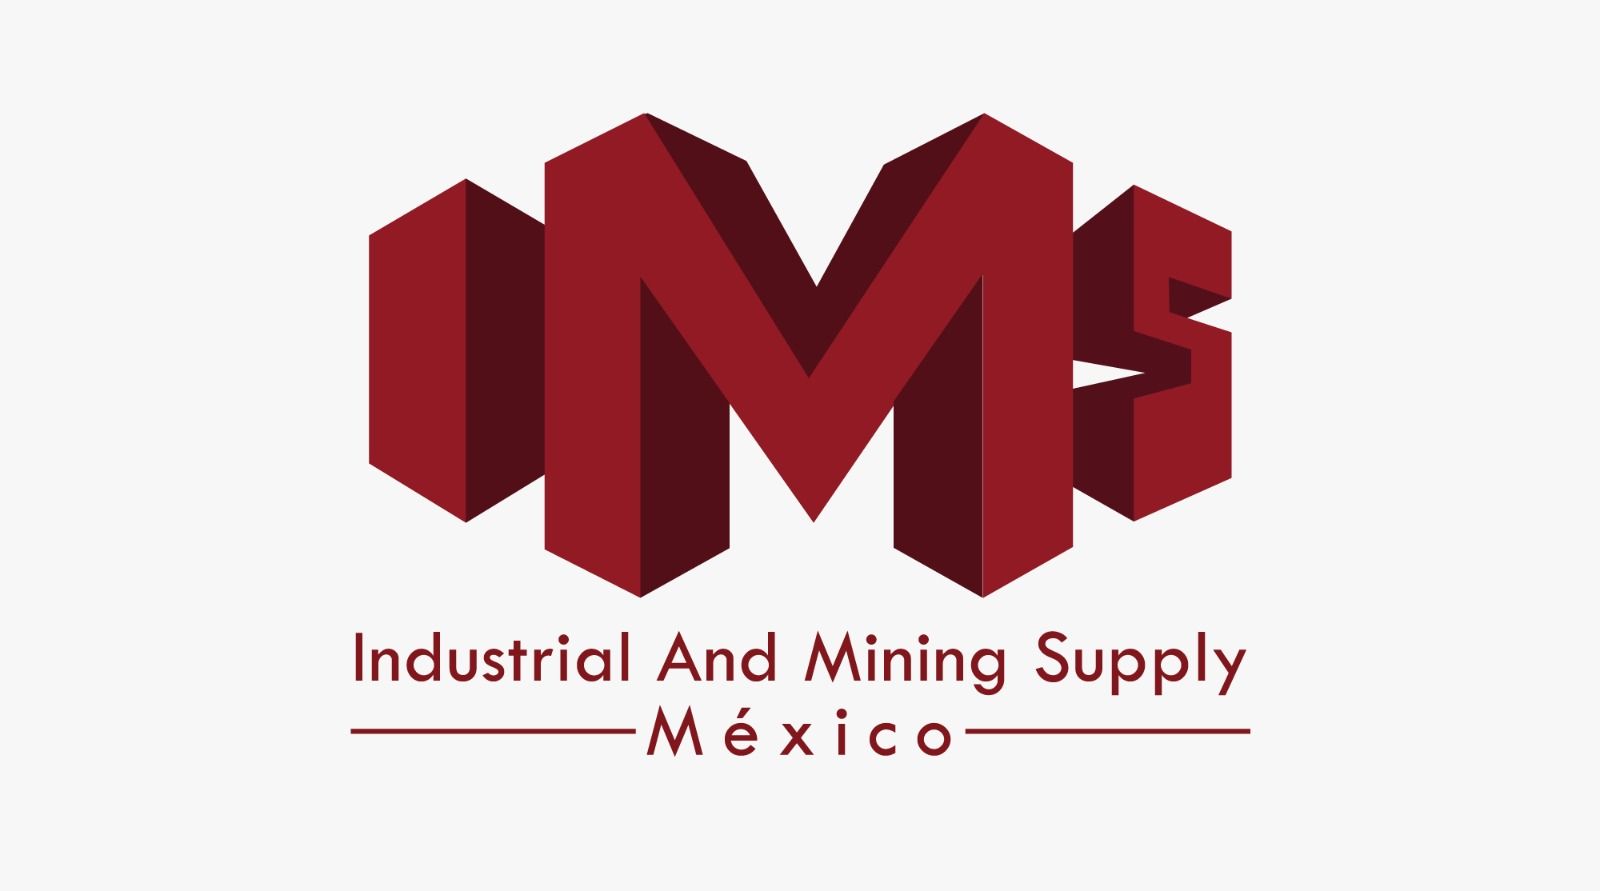 INDUSTRIAL AND MINING SUPPLIES MEXICO